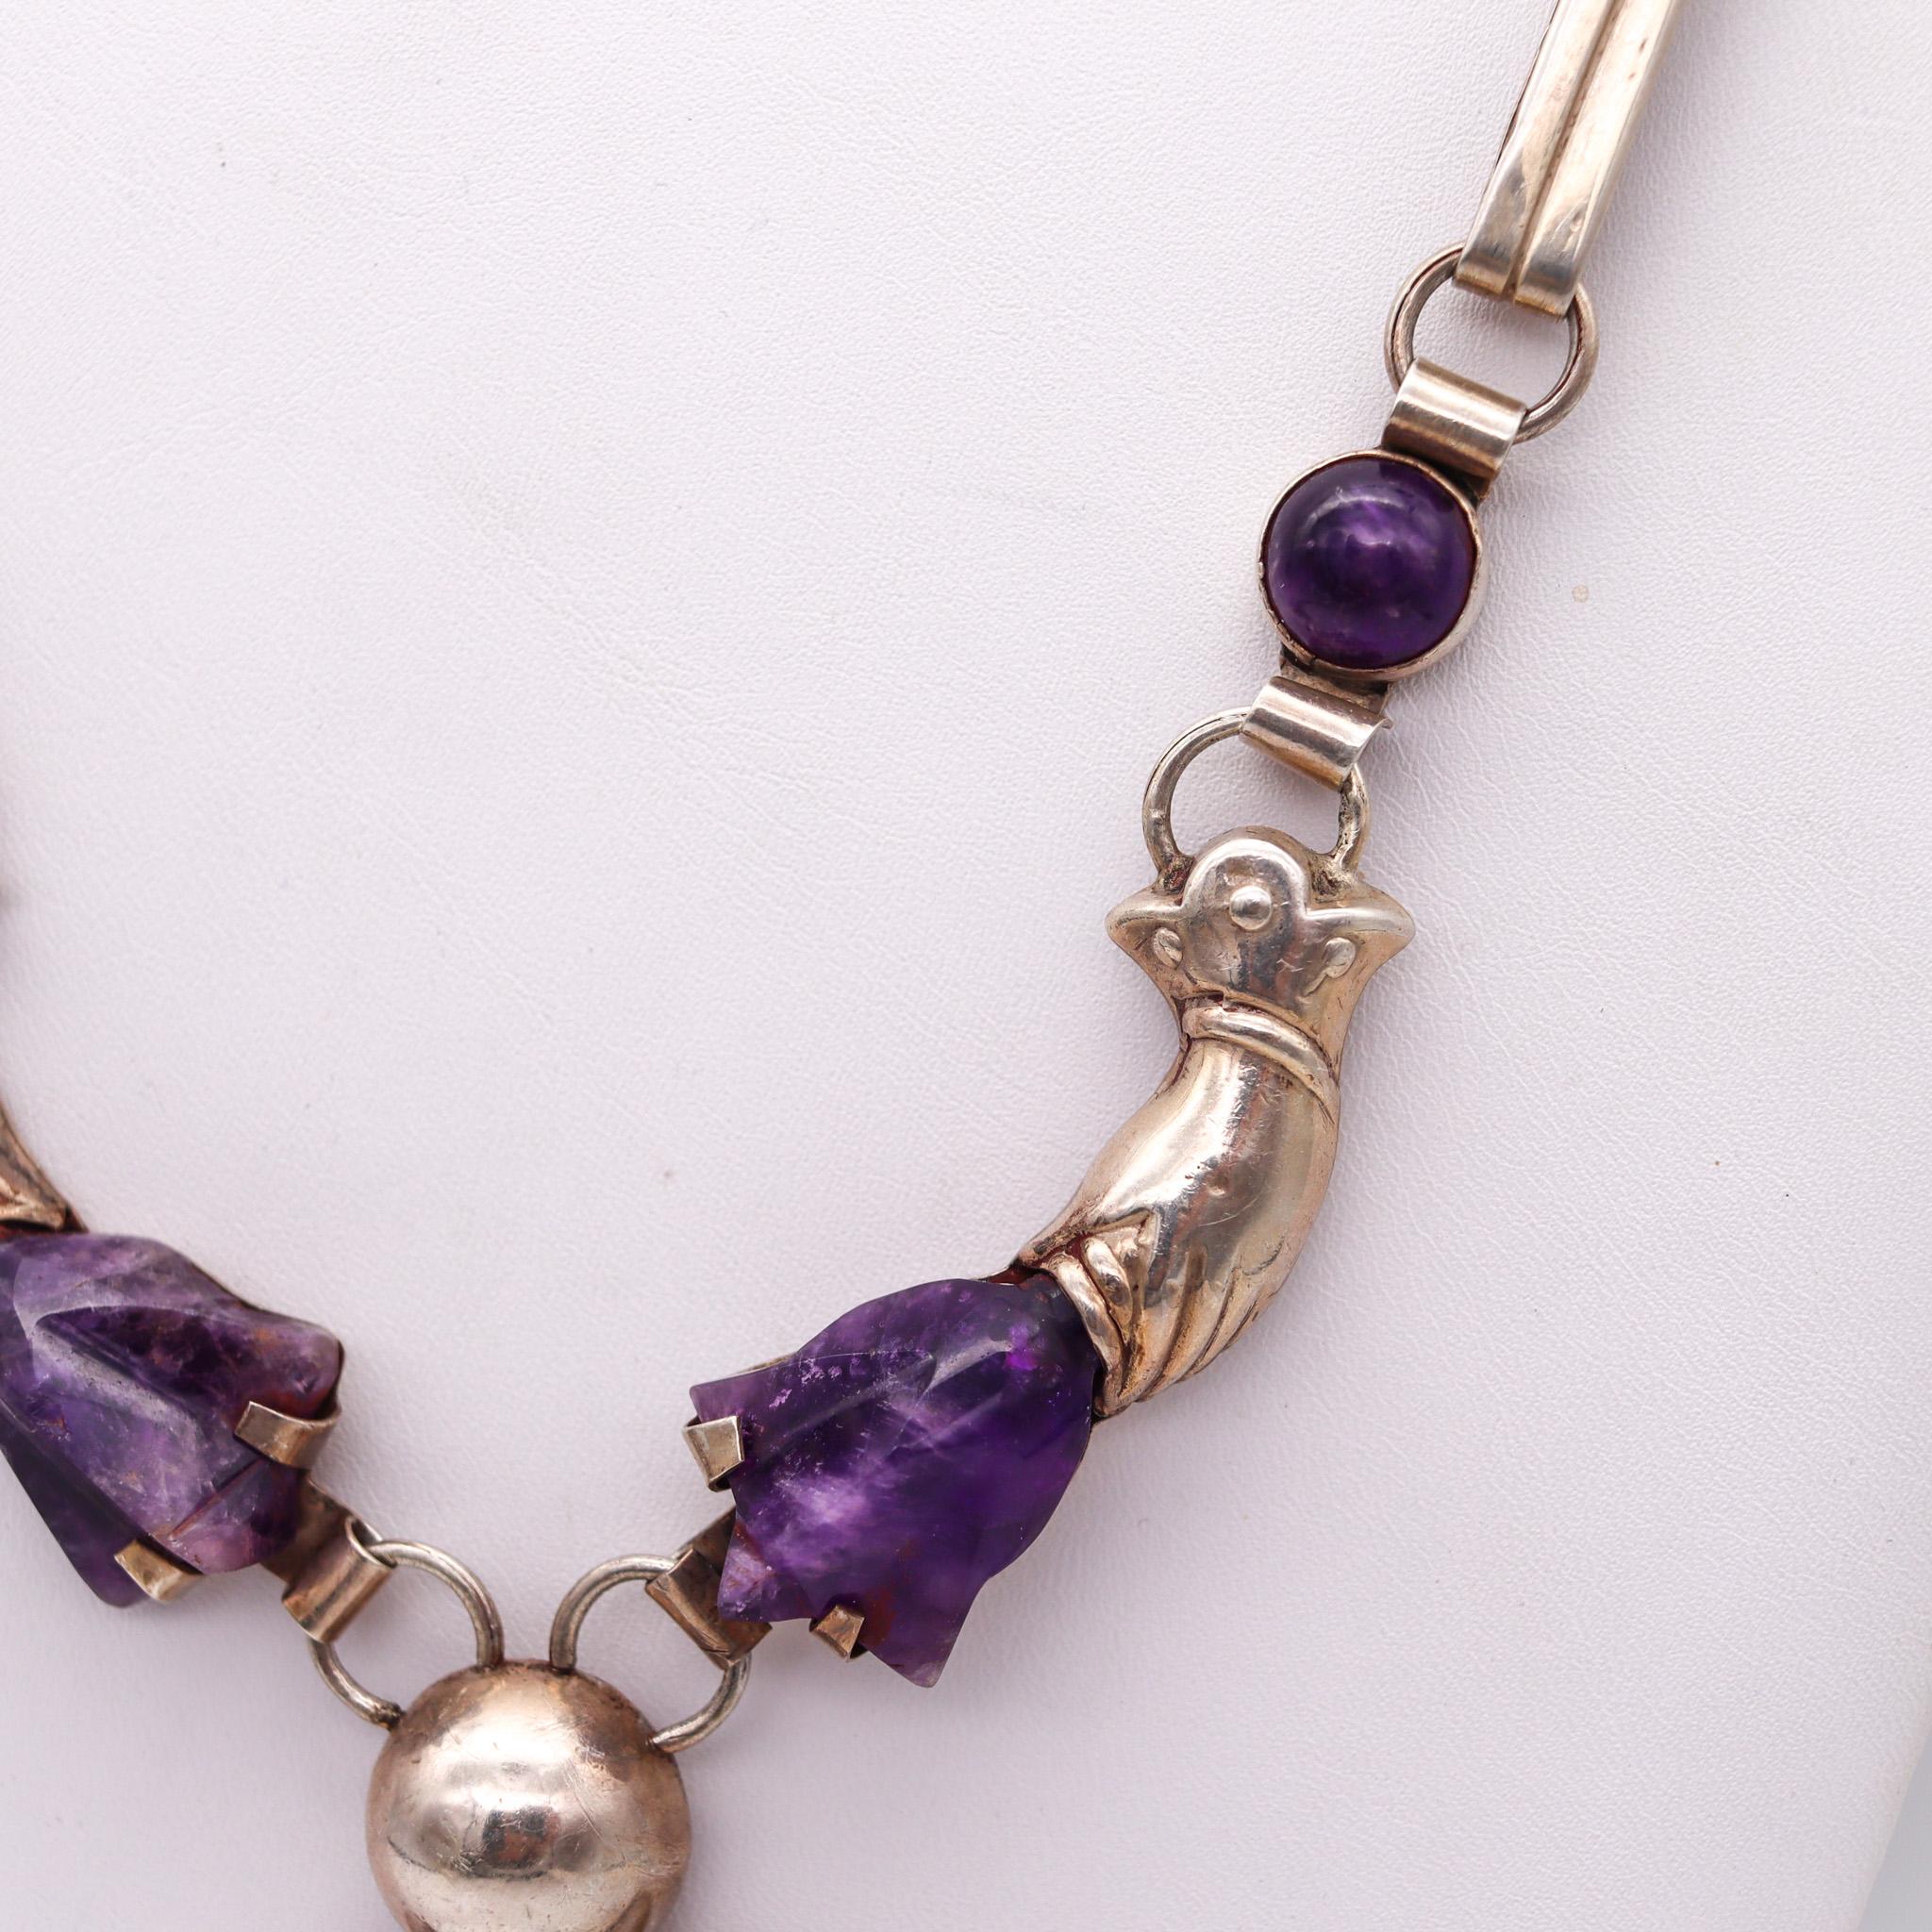 Retro Mexican 1945 Taxco Studio Drop Necklace 925 Sterling Silver with Carved Amethyst For Sale